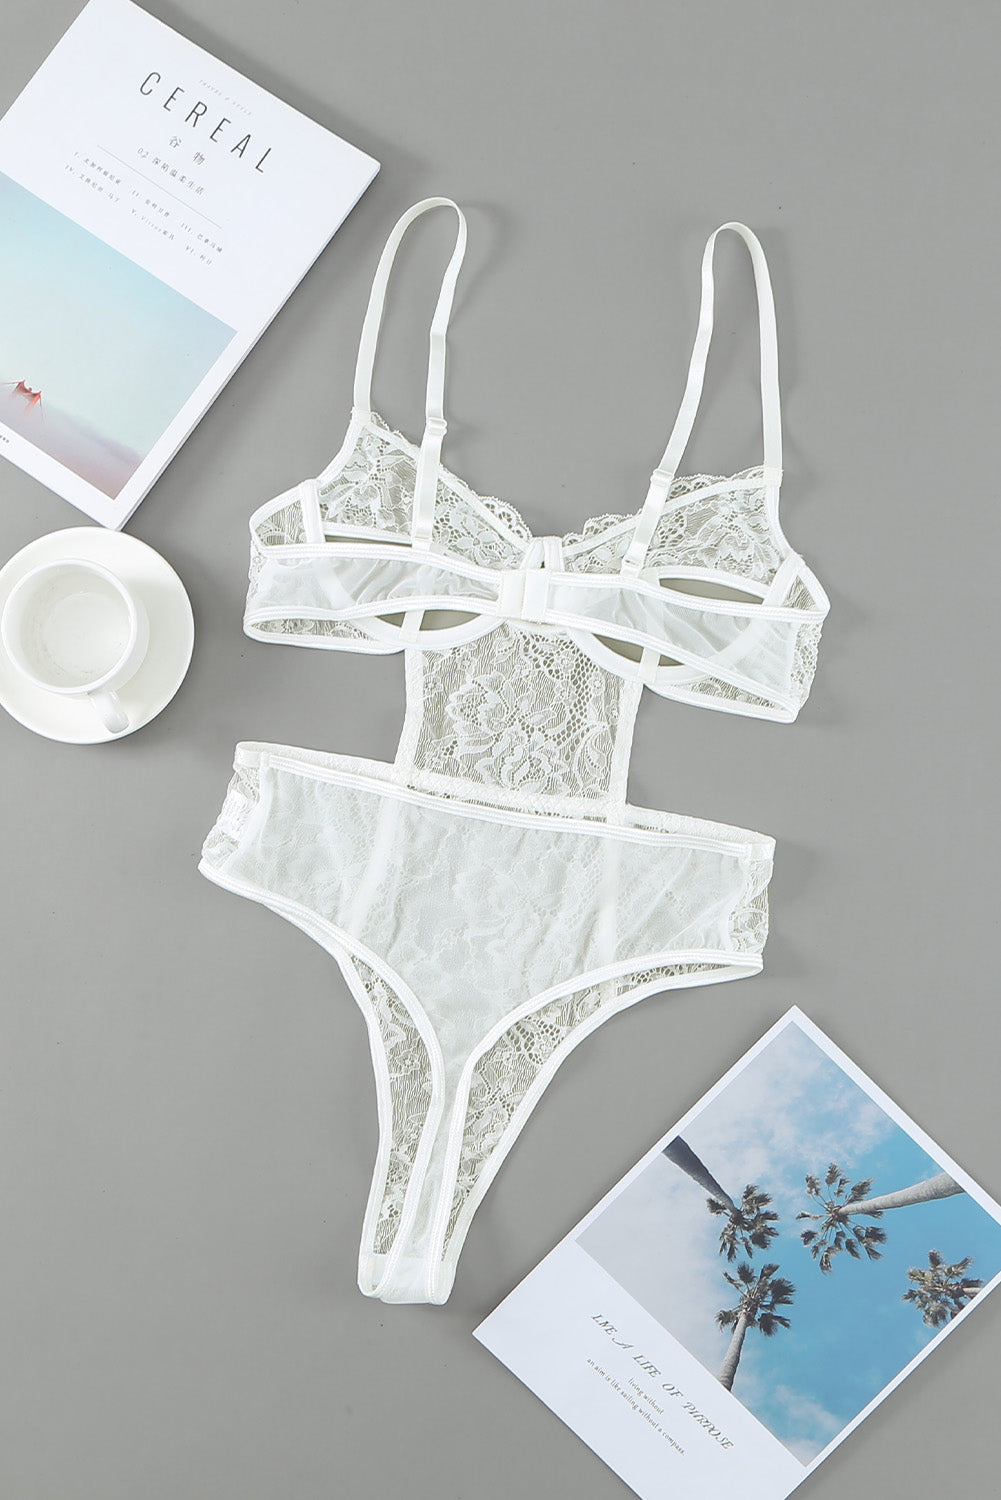 Chic White Lace Teddy Lingerie